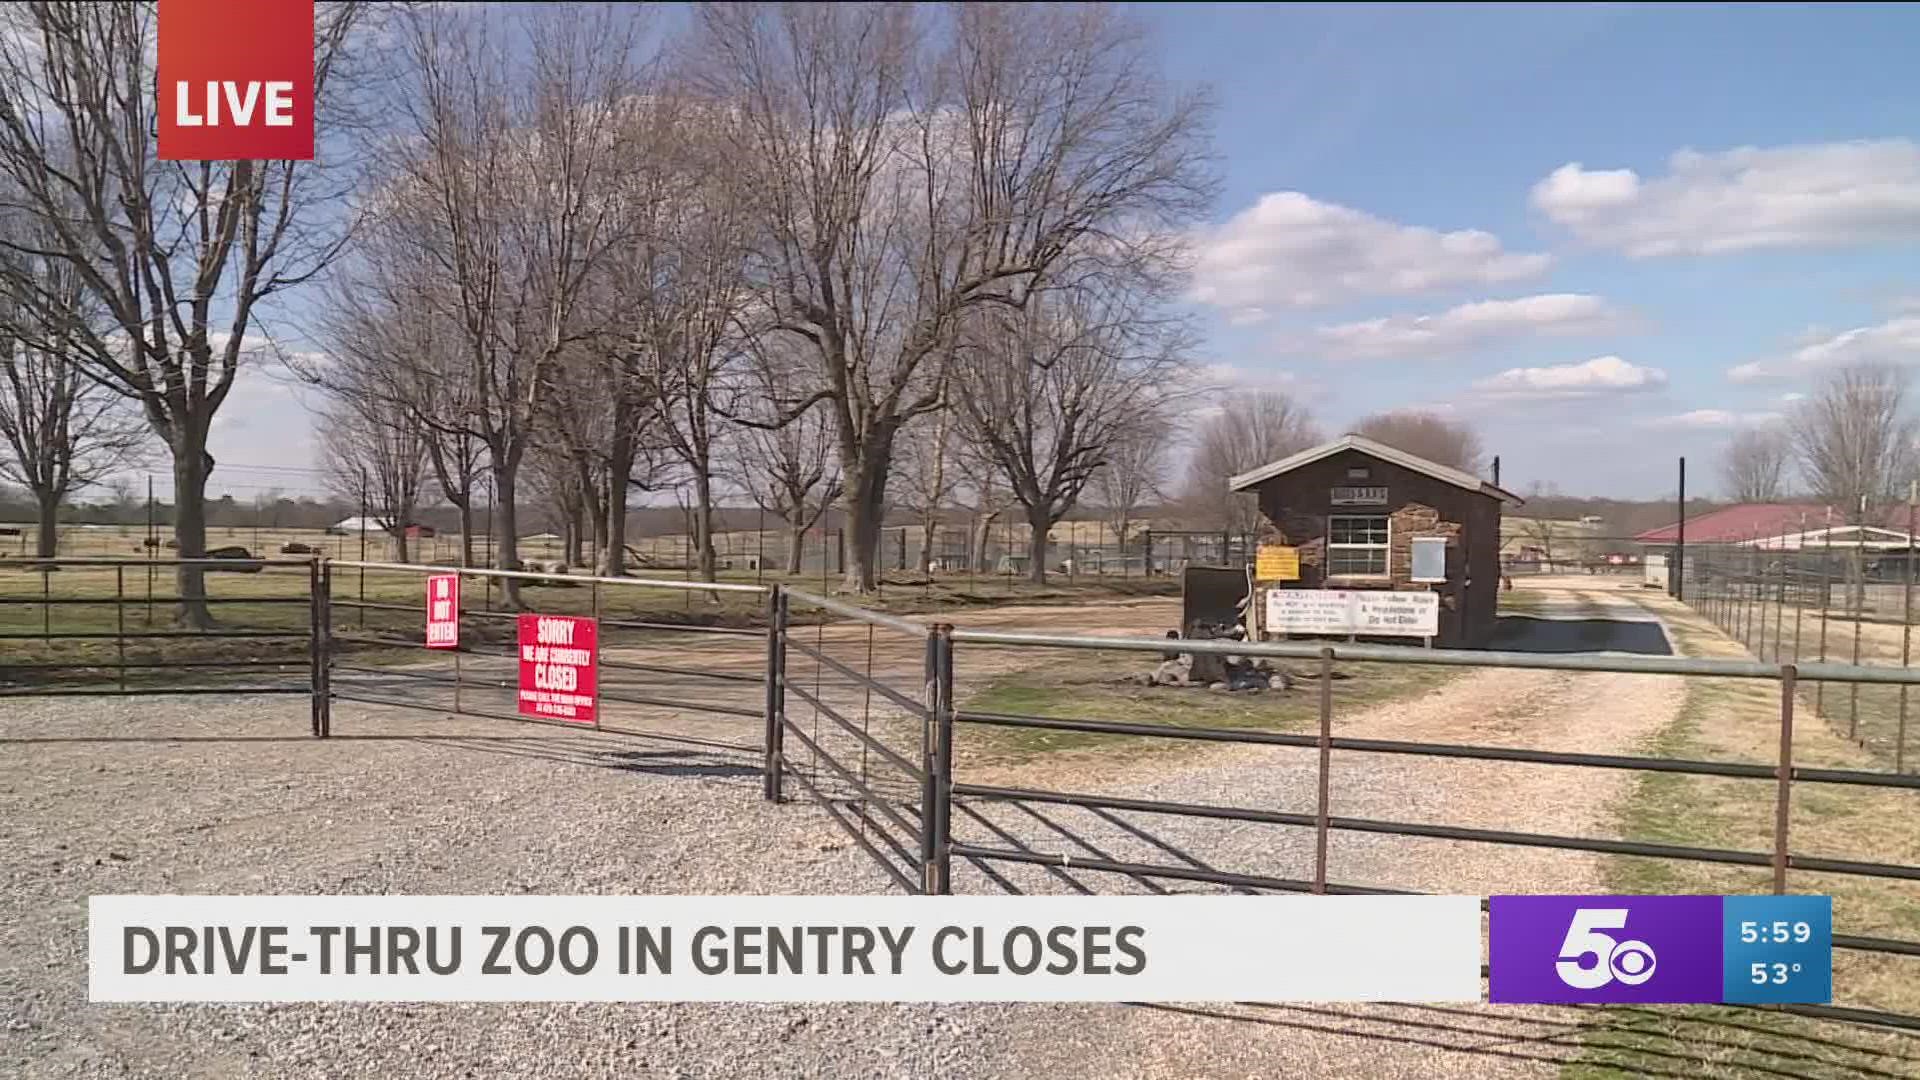 The Wilderness Safari in Gentry is closing its doors. 5NEWS is working to figure out why a staple of the Northwest Arkansas community made this decision.